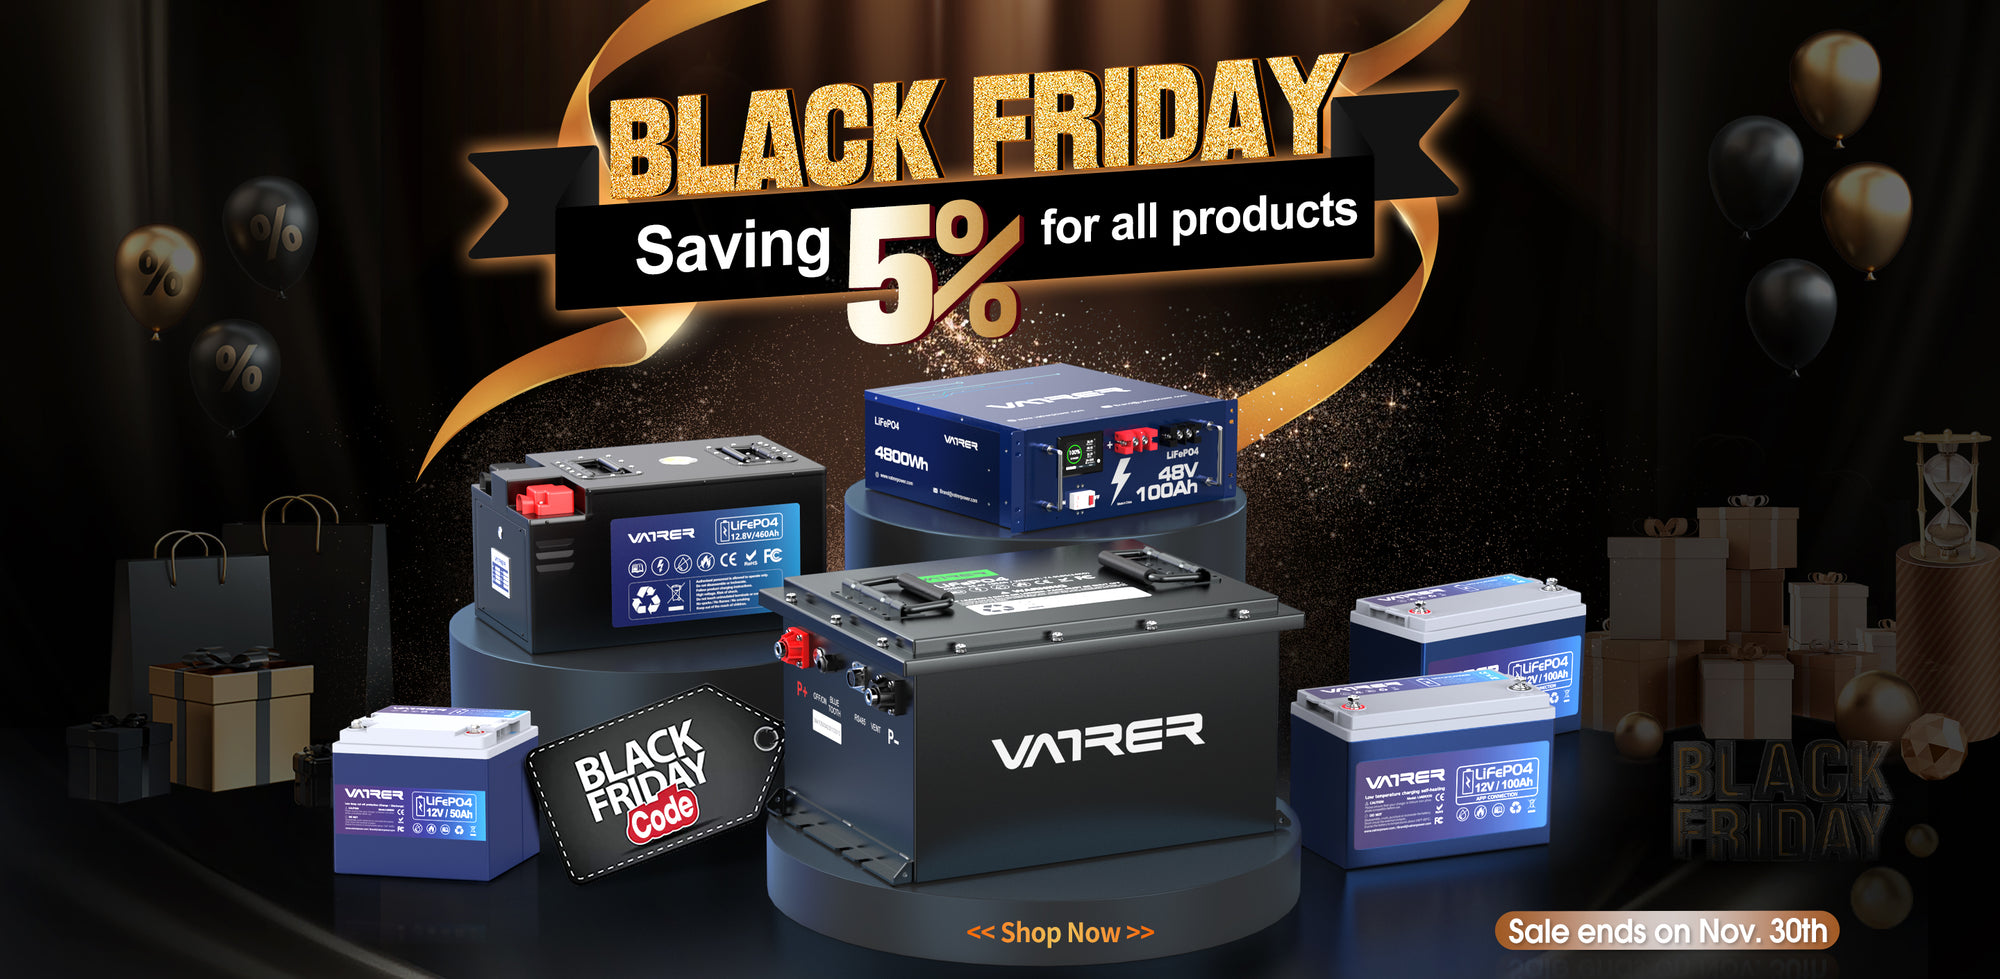 Black Friday, 5% Discount for All Products